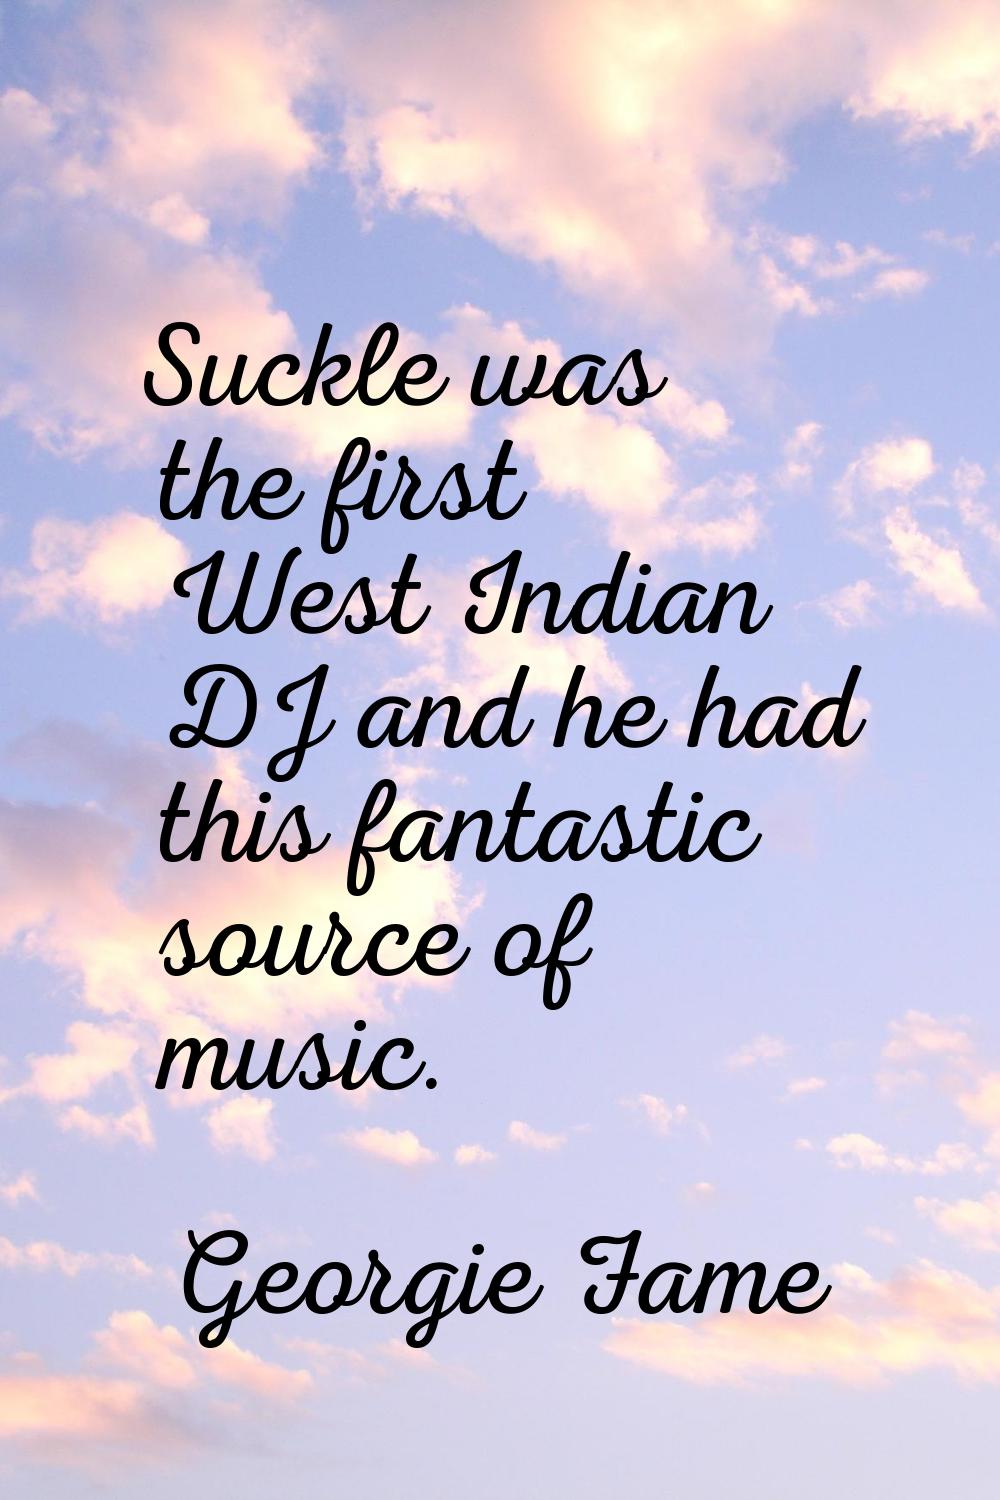 Suckle was the first West Indian DJ and he had this fantastic source of music.